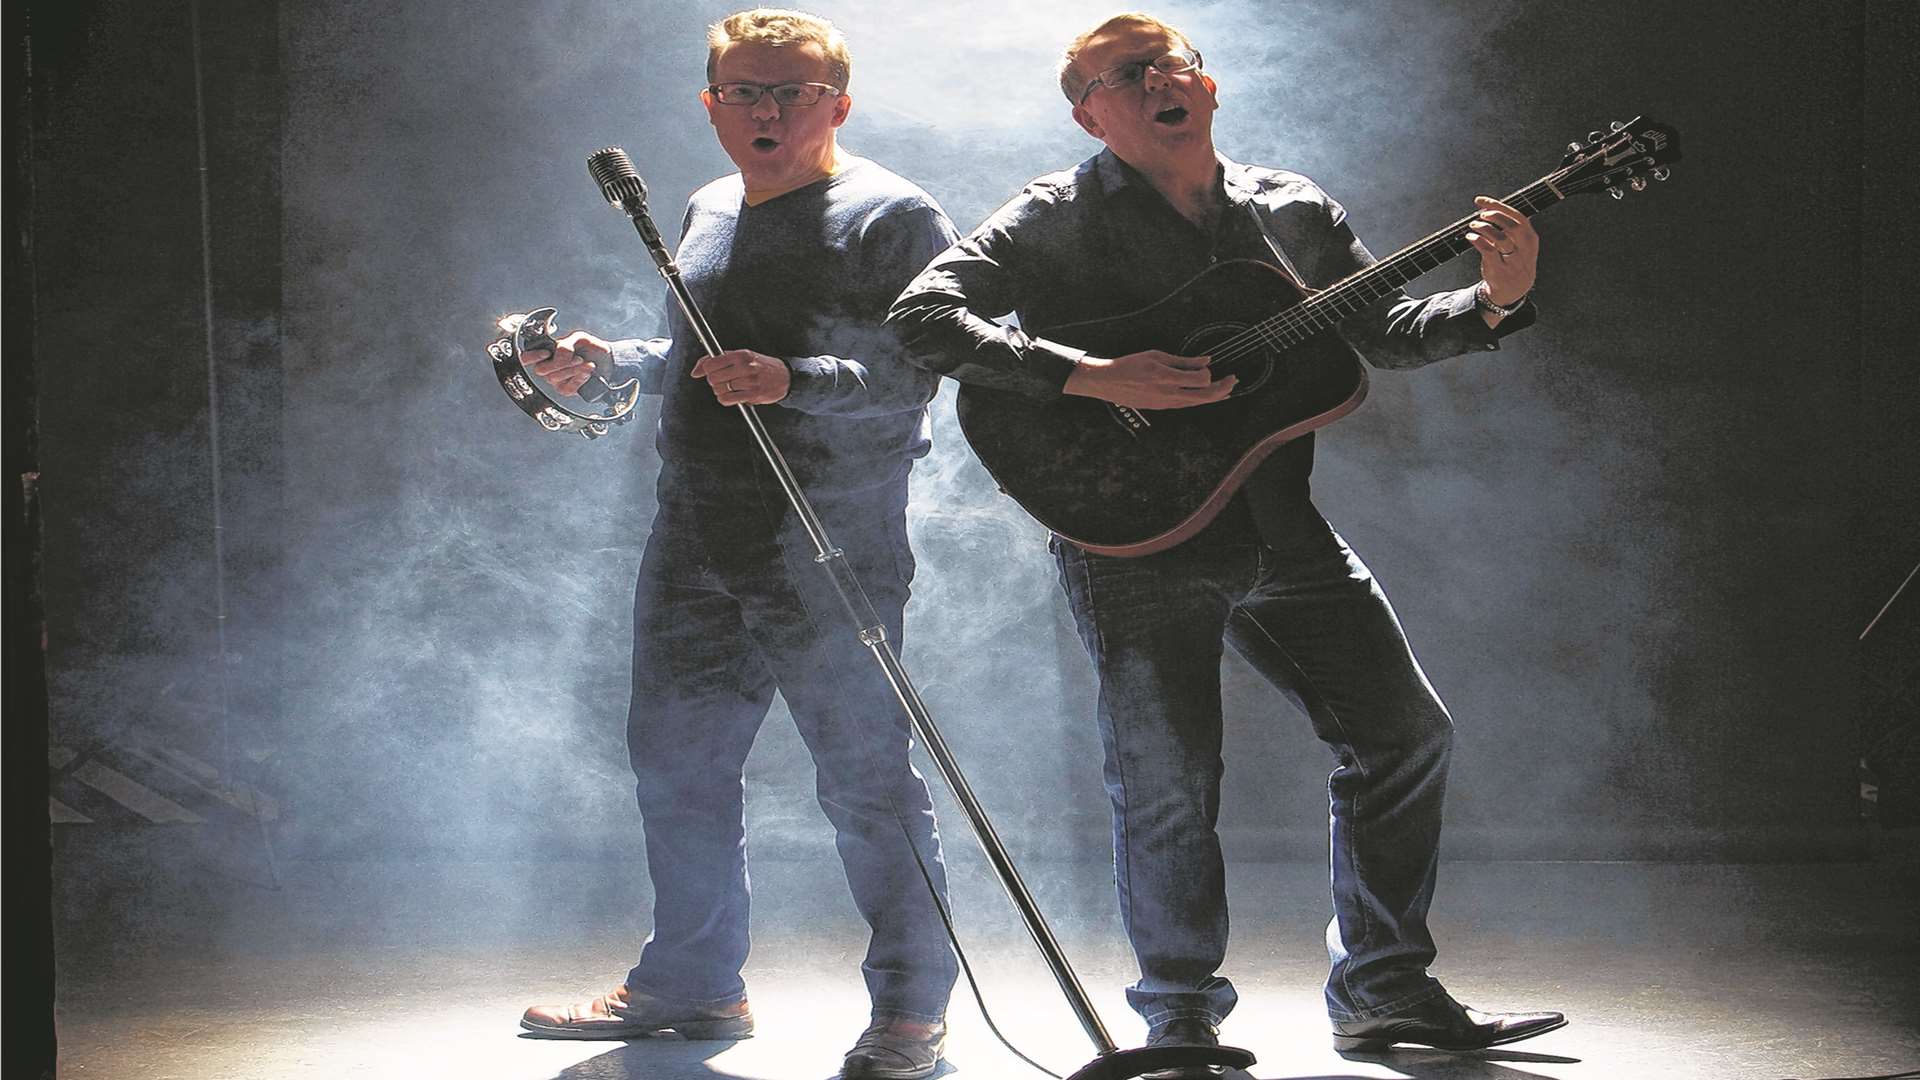 The Proclaimers are Charlie and Craig Reid